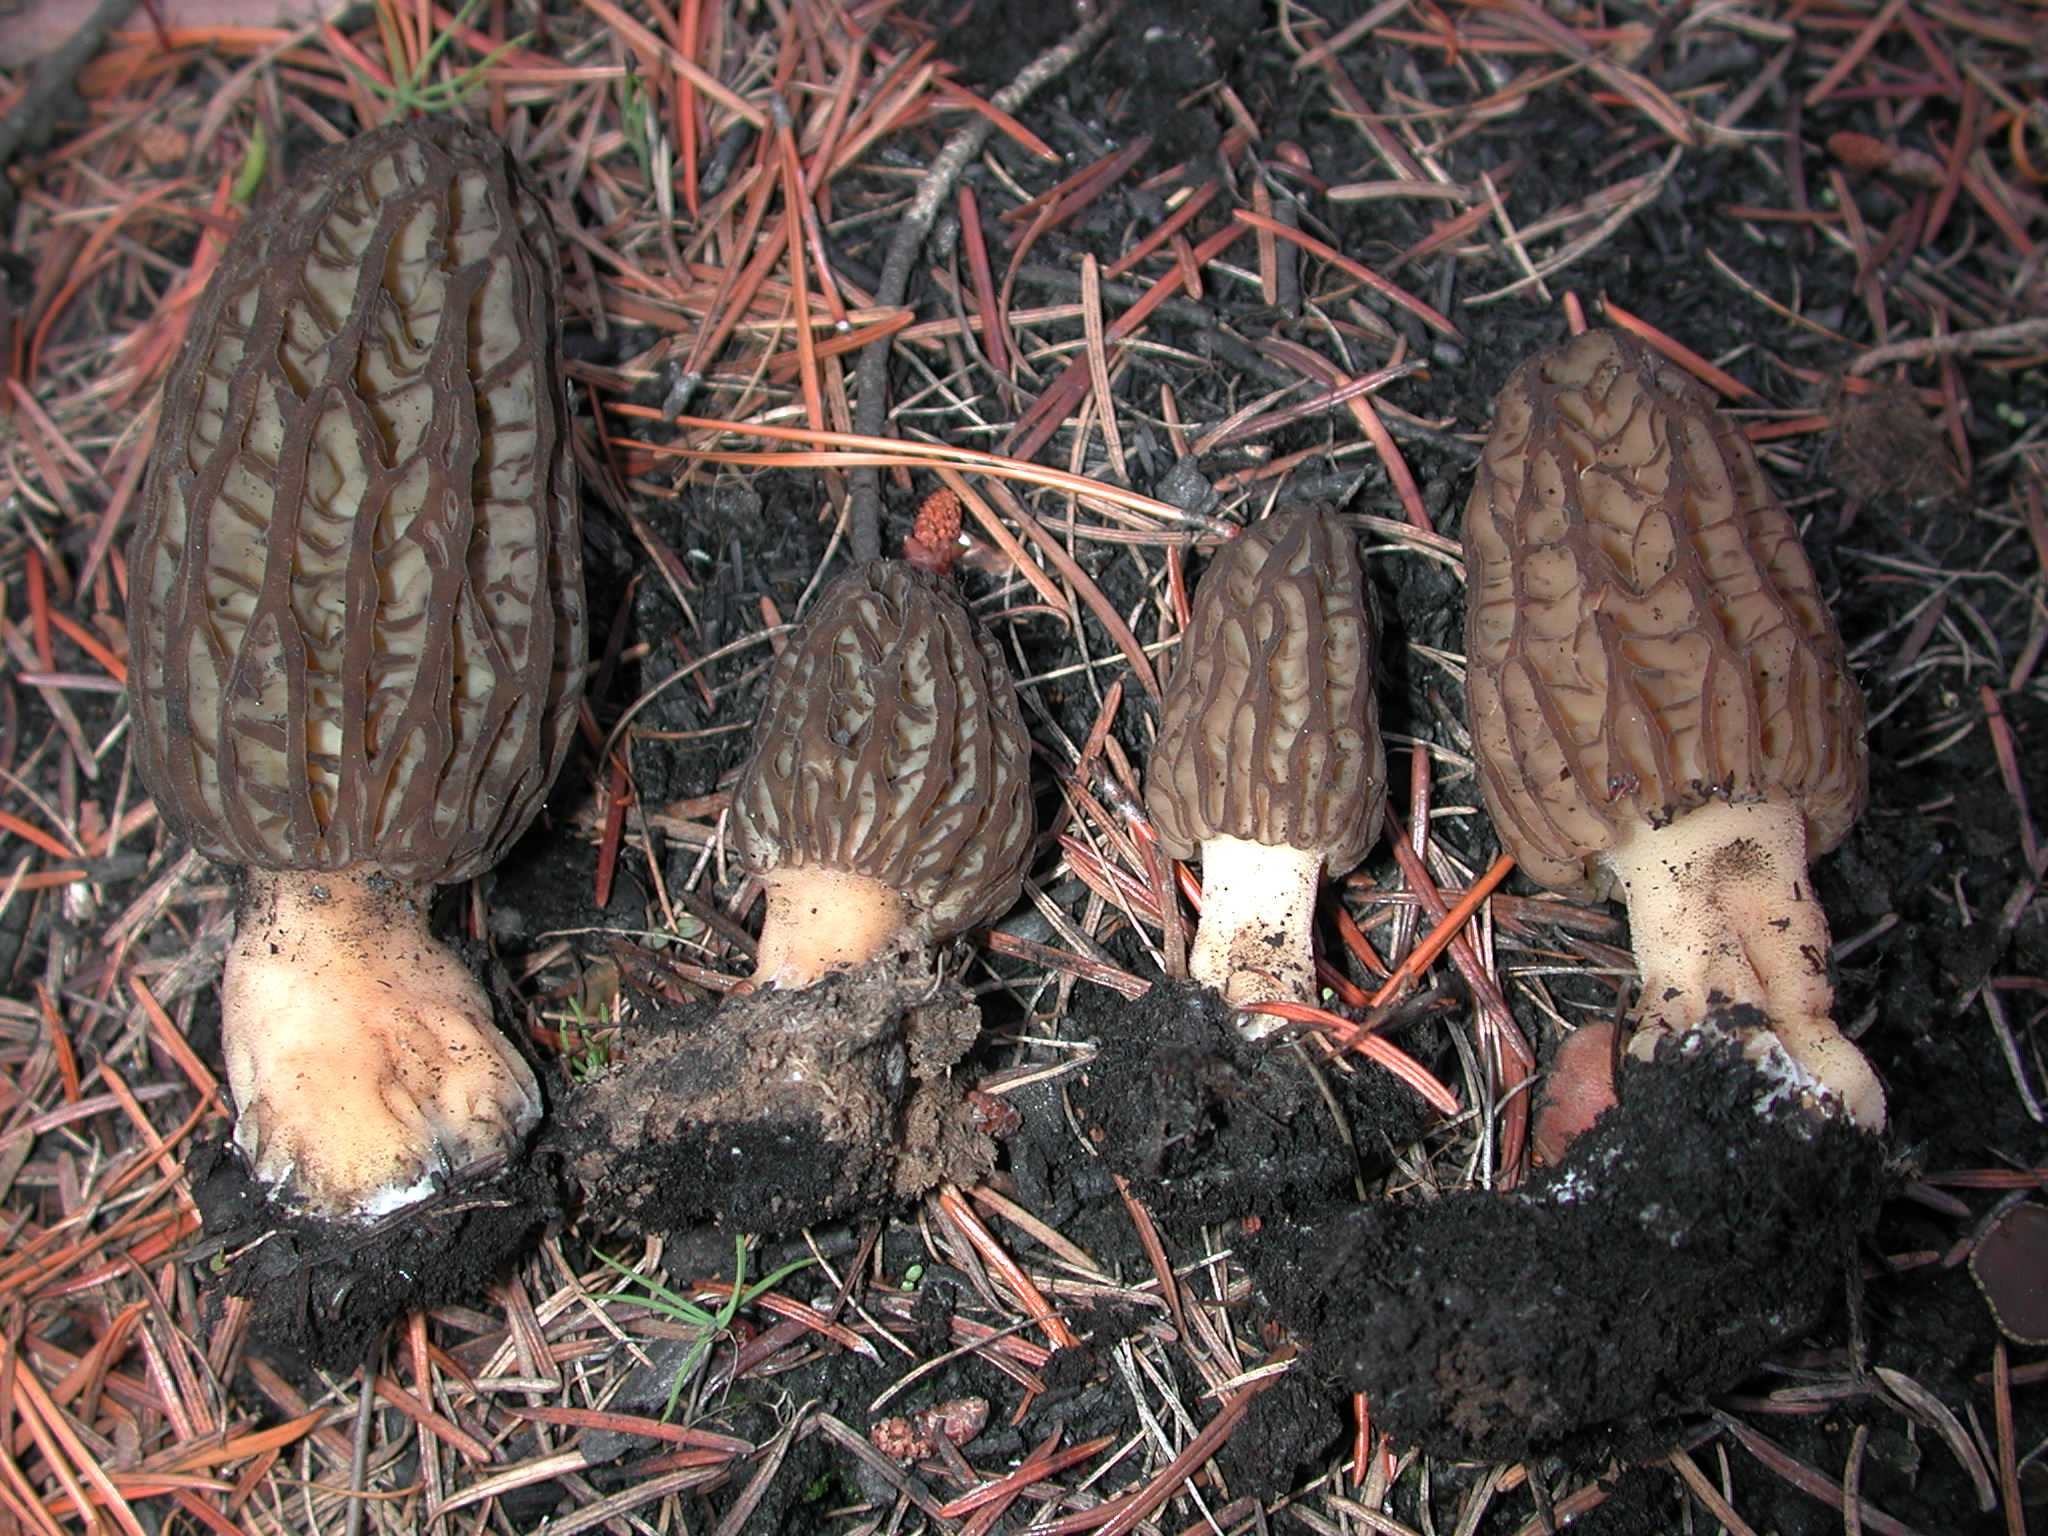 Green fire morels (left) and pink fire morels (right) are two species of wild mushrooms commonly seen in burned areas.